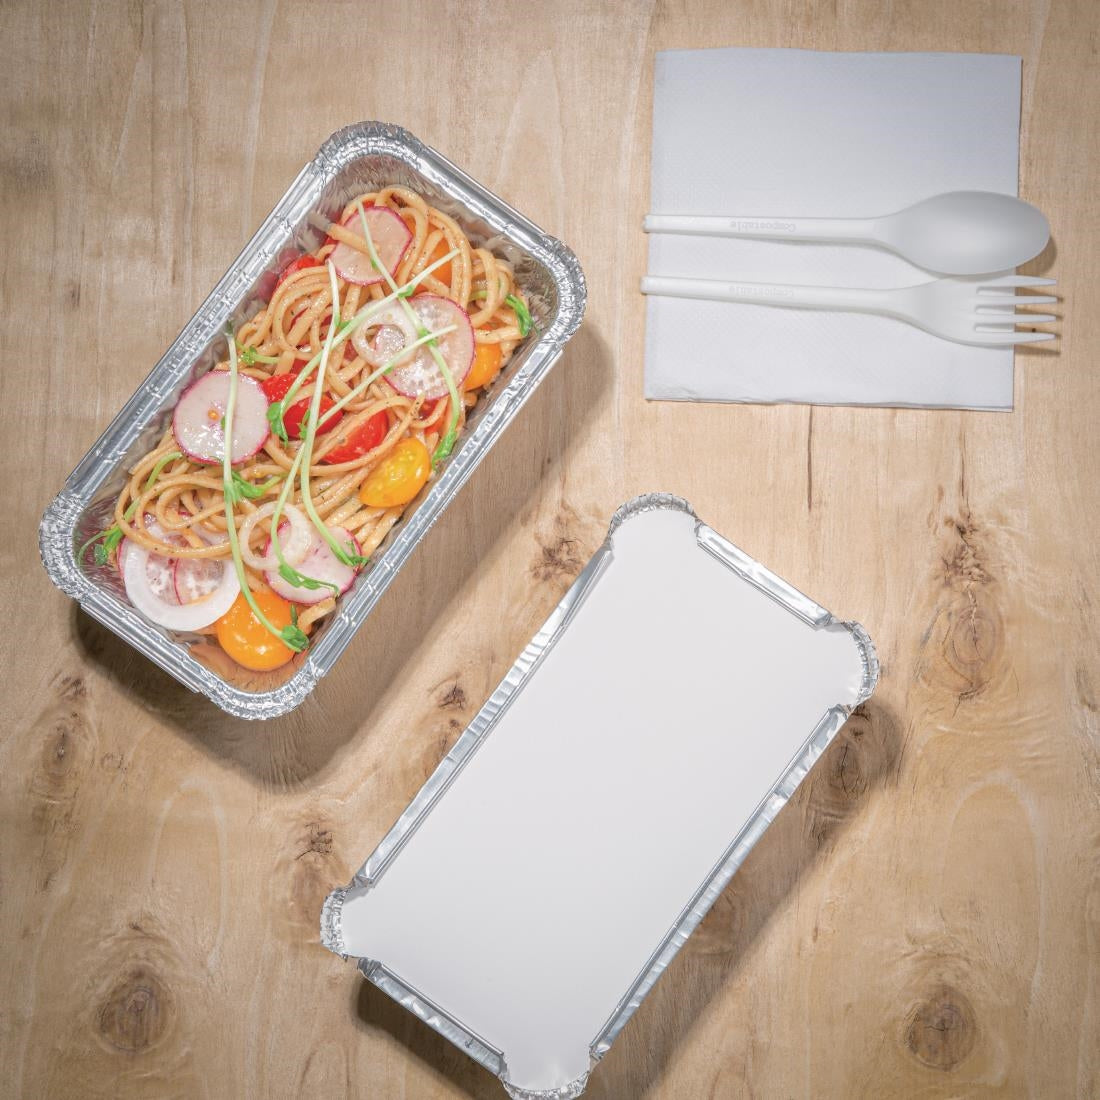 Fiesta Foil Containers Large 688ml / 24oz (Pack of 500) JD Catering Equipment Solutions Ltd